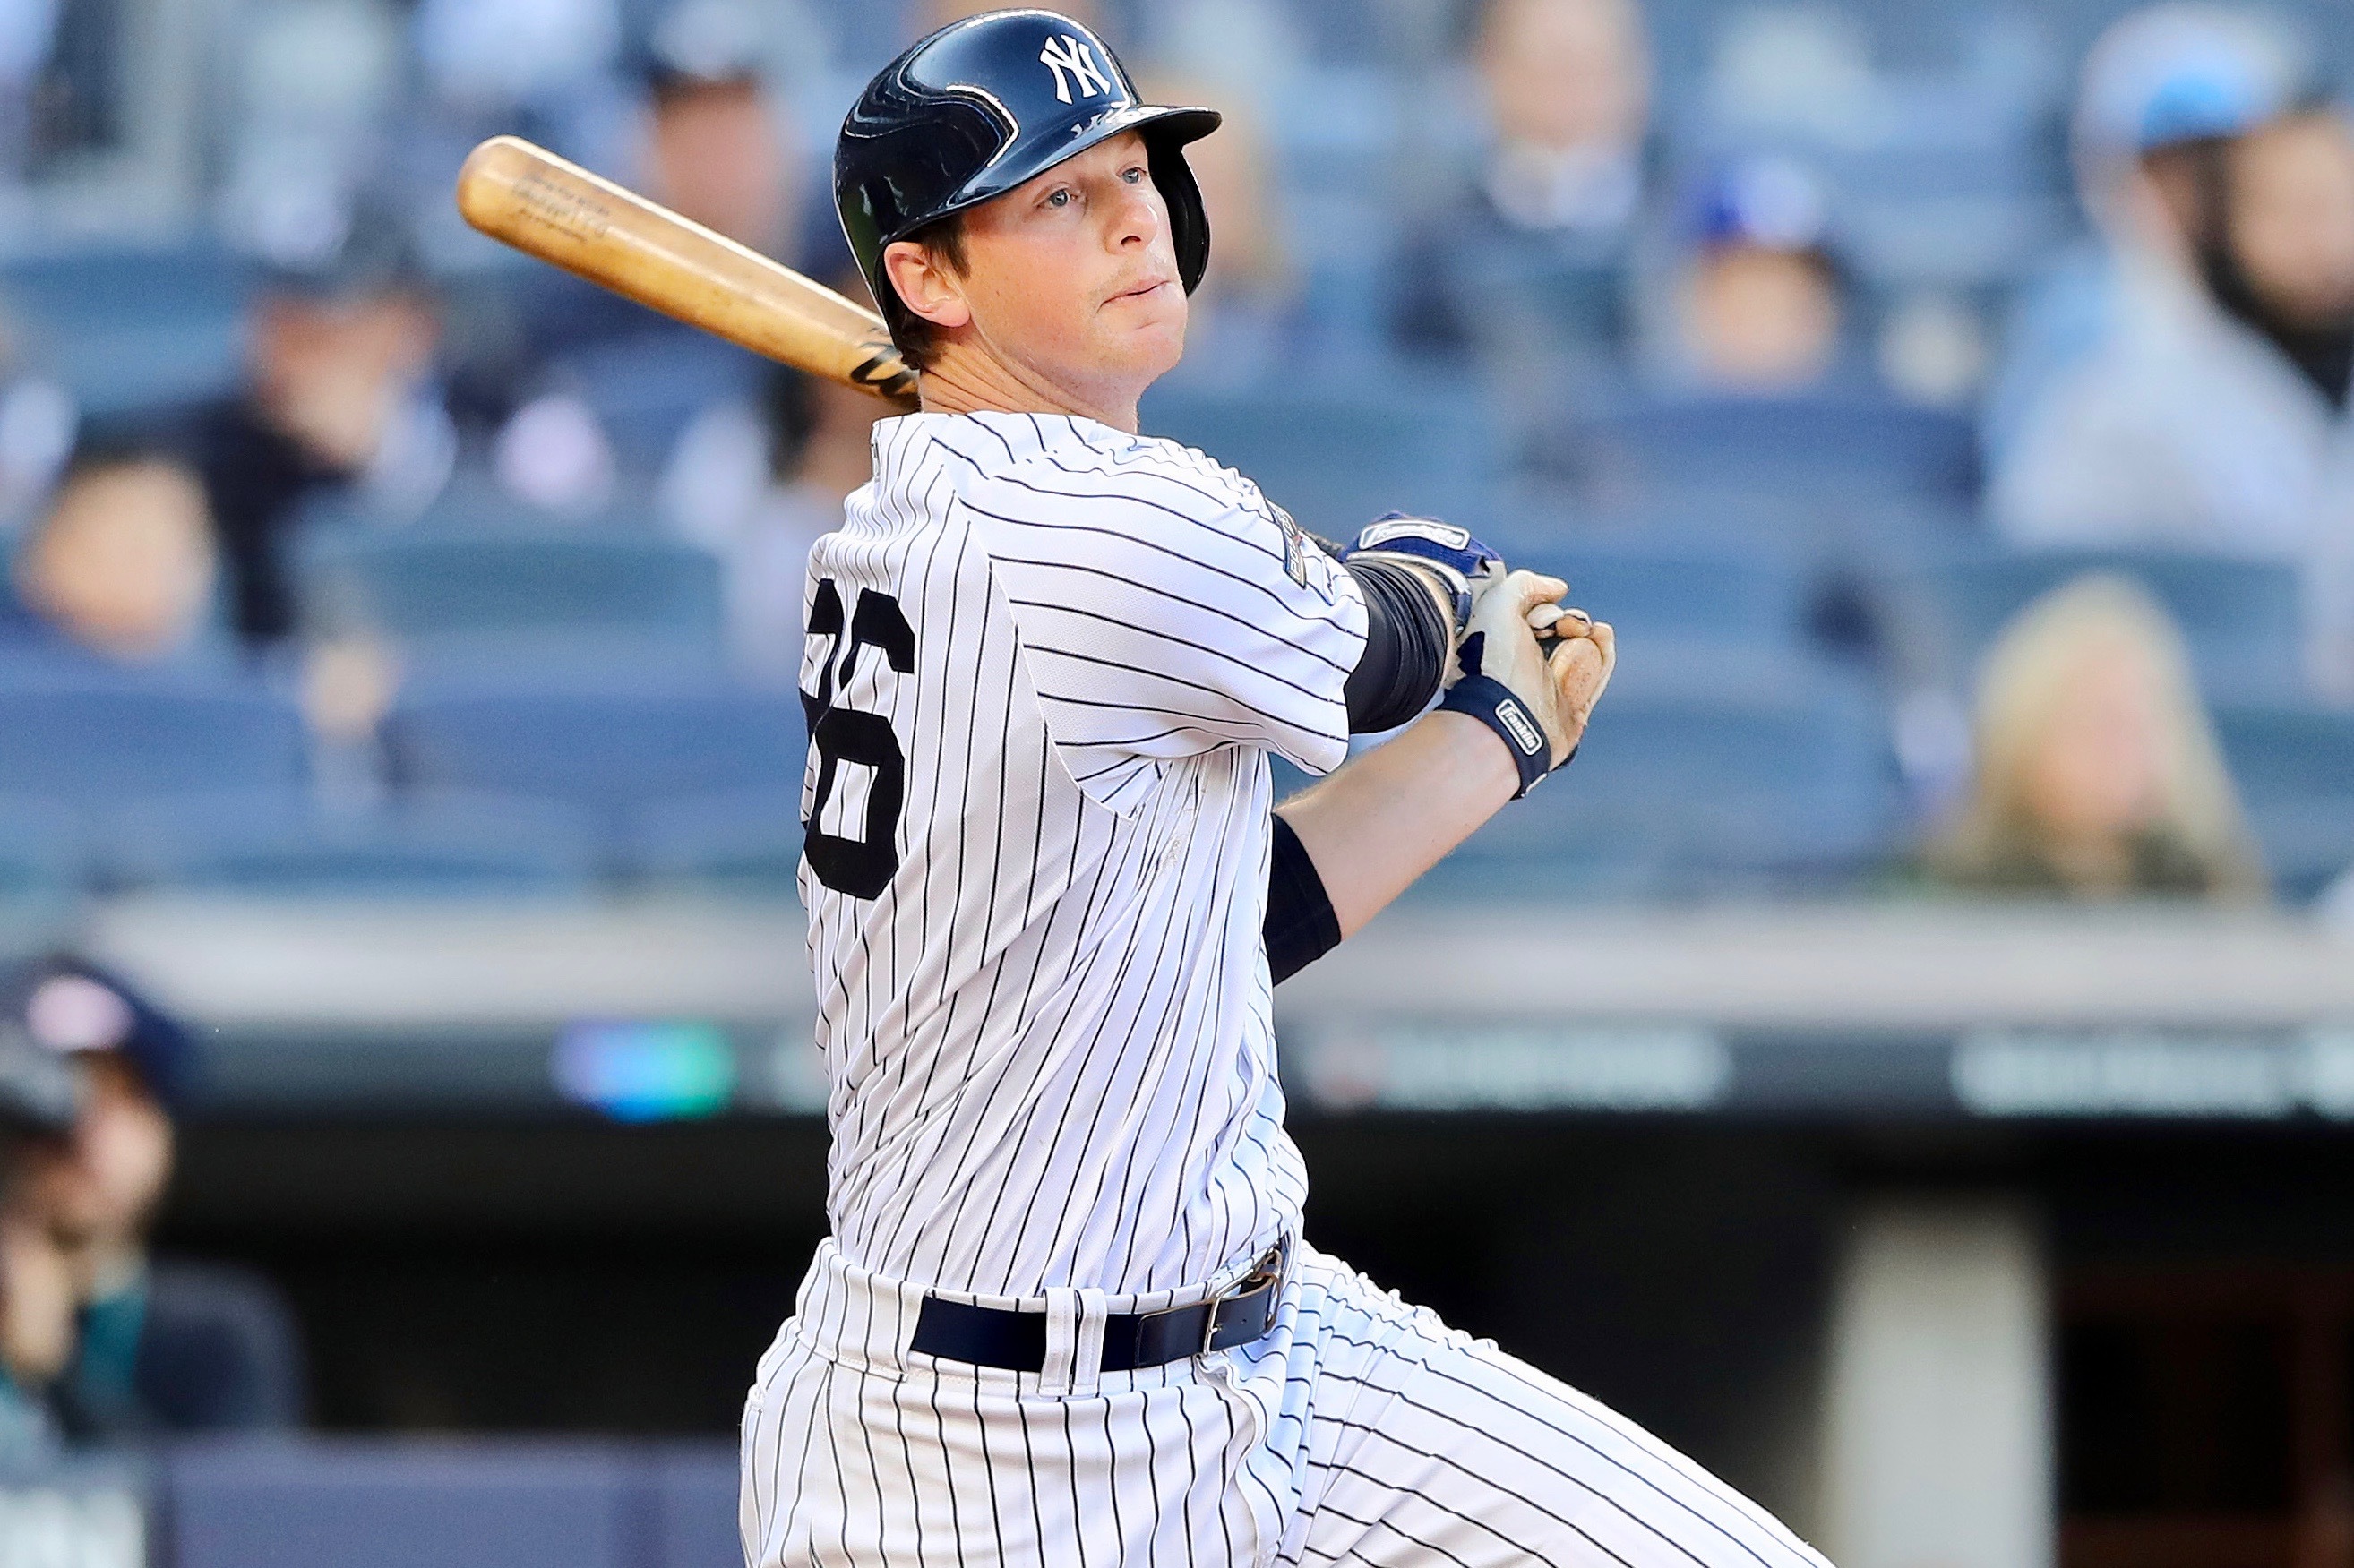 Yankees' star DJ LeMahieu could 're-engage' with Red Sox, per report